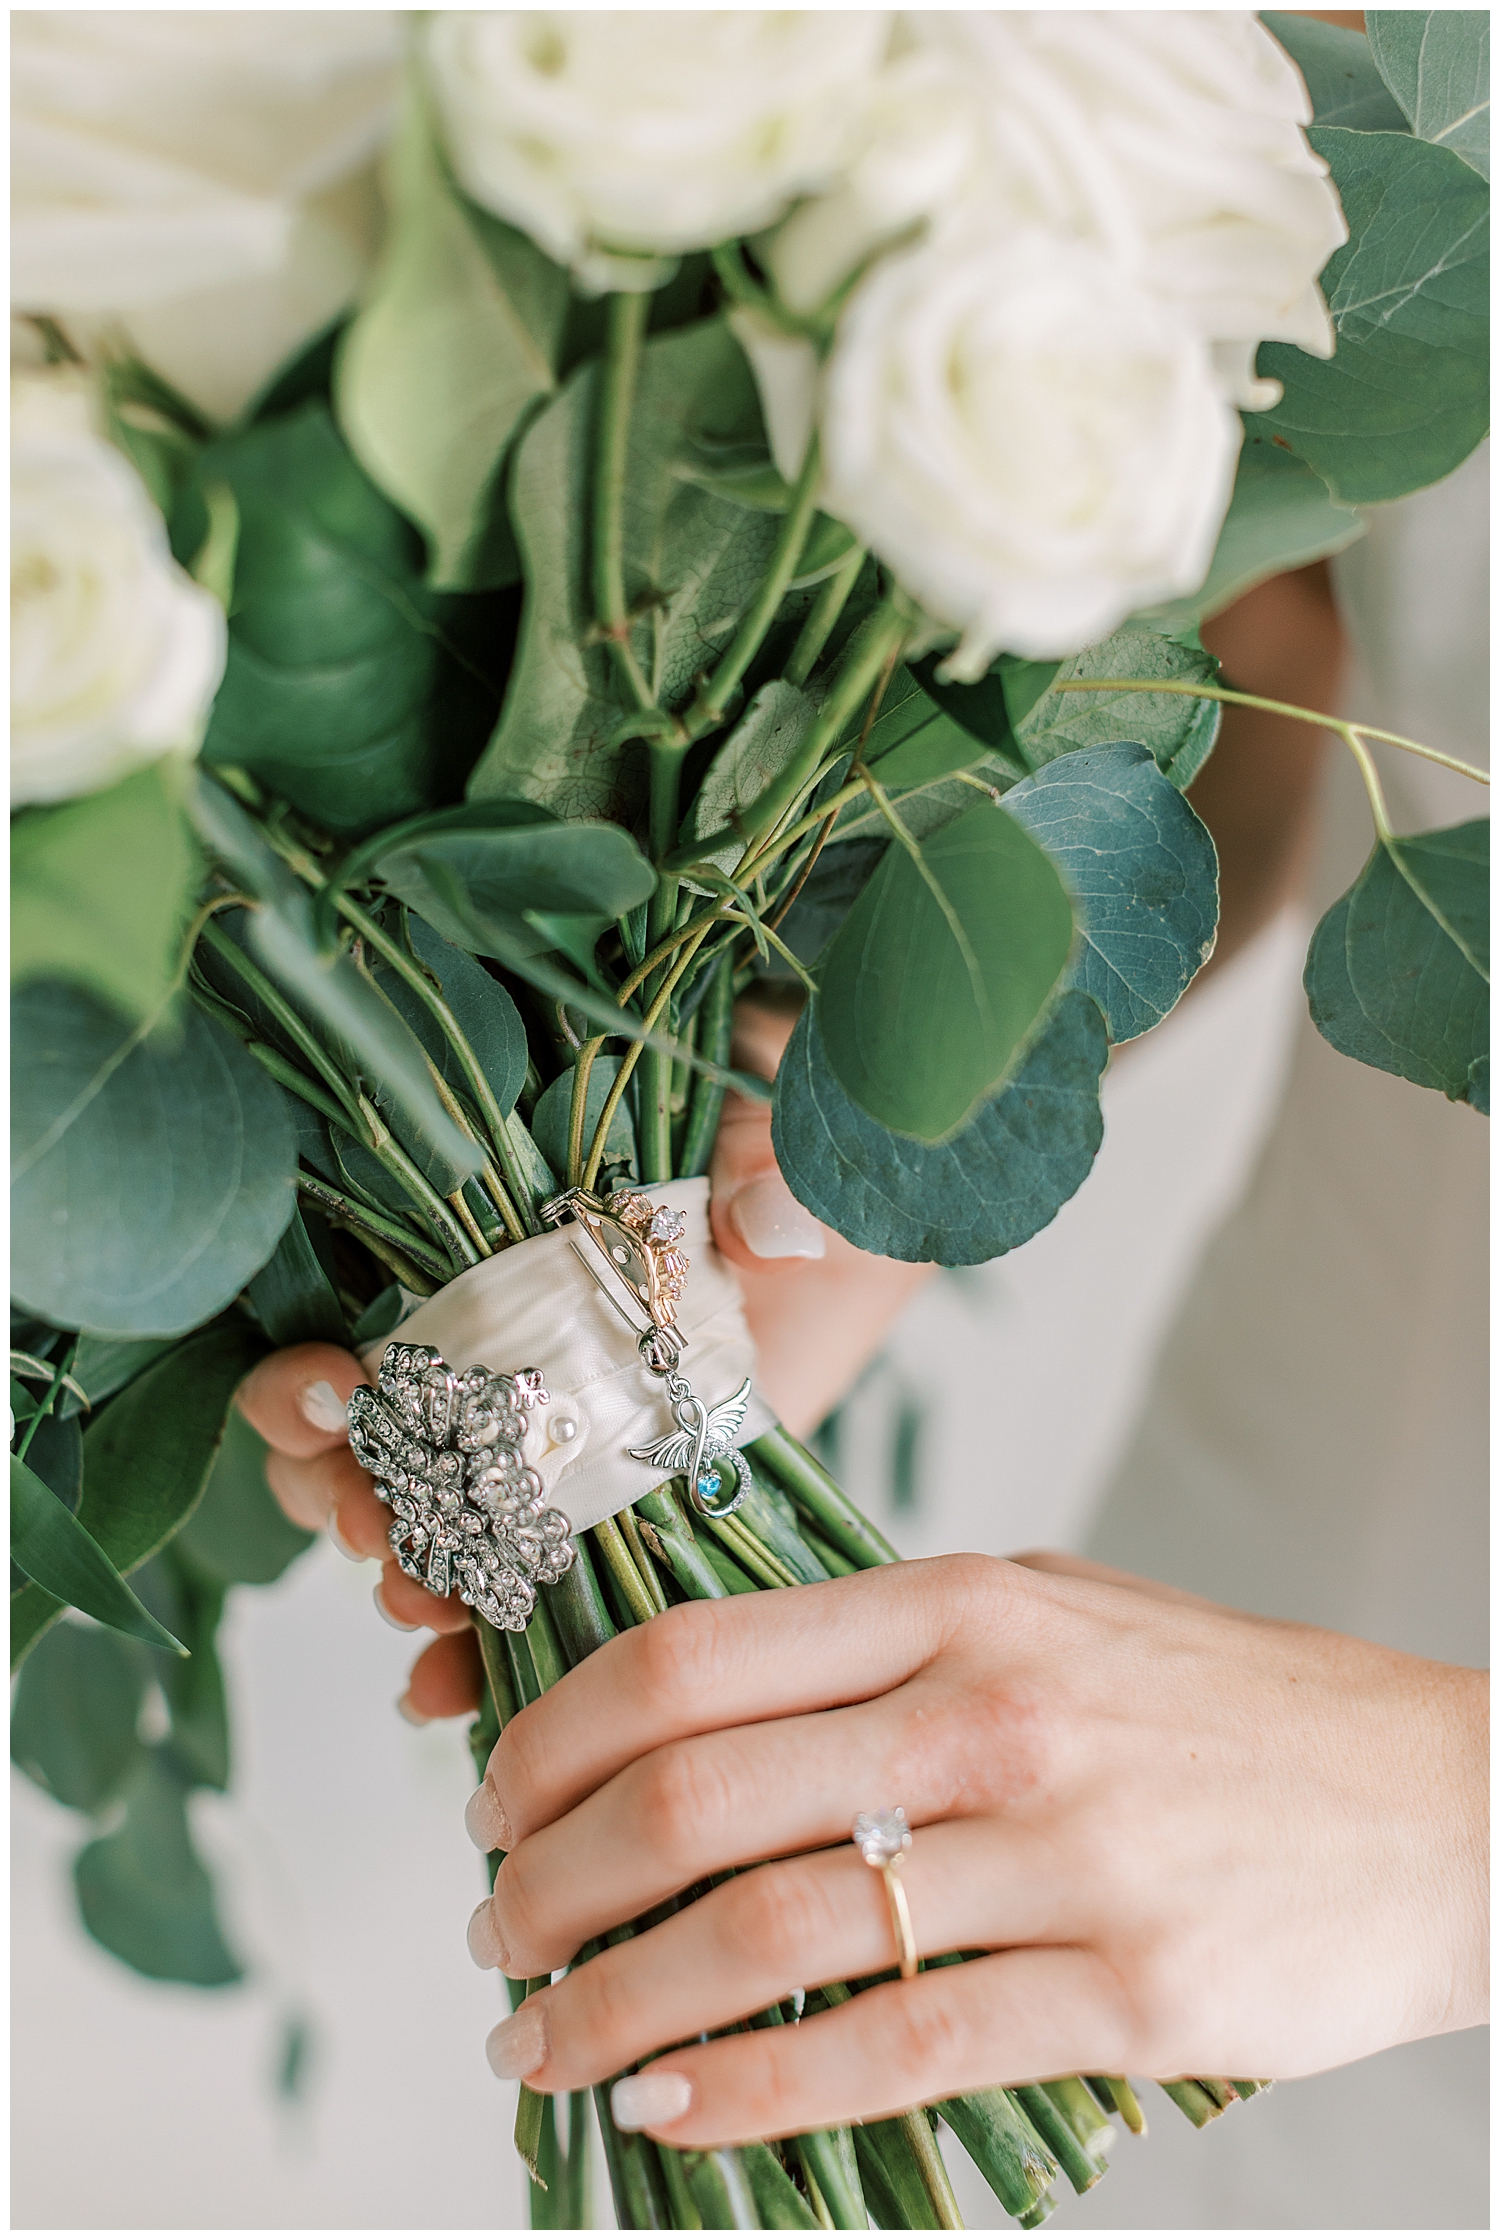 A charm hangs on the bridal bouquet.